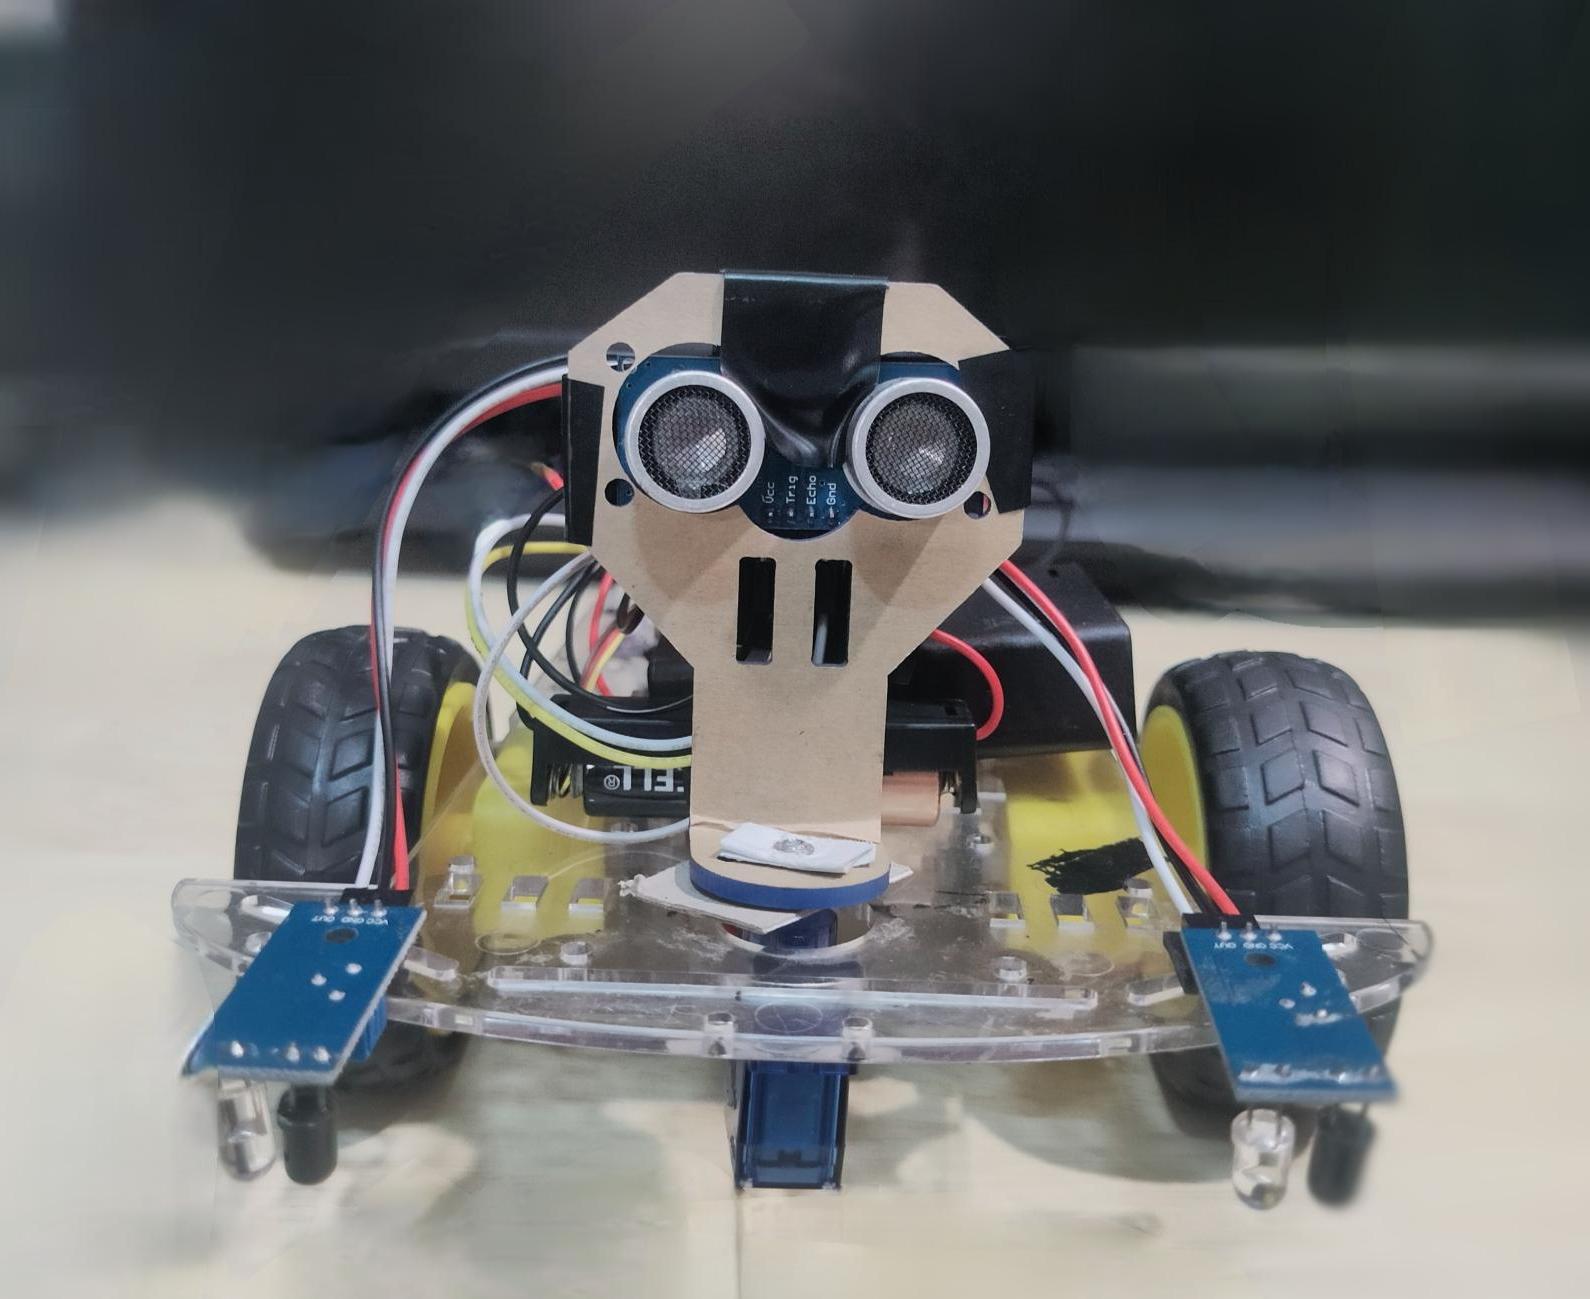 Obstacle and Cliff Detection Robotic Car